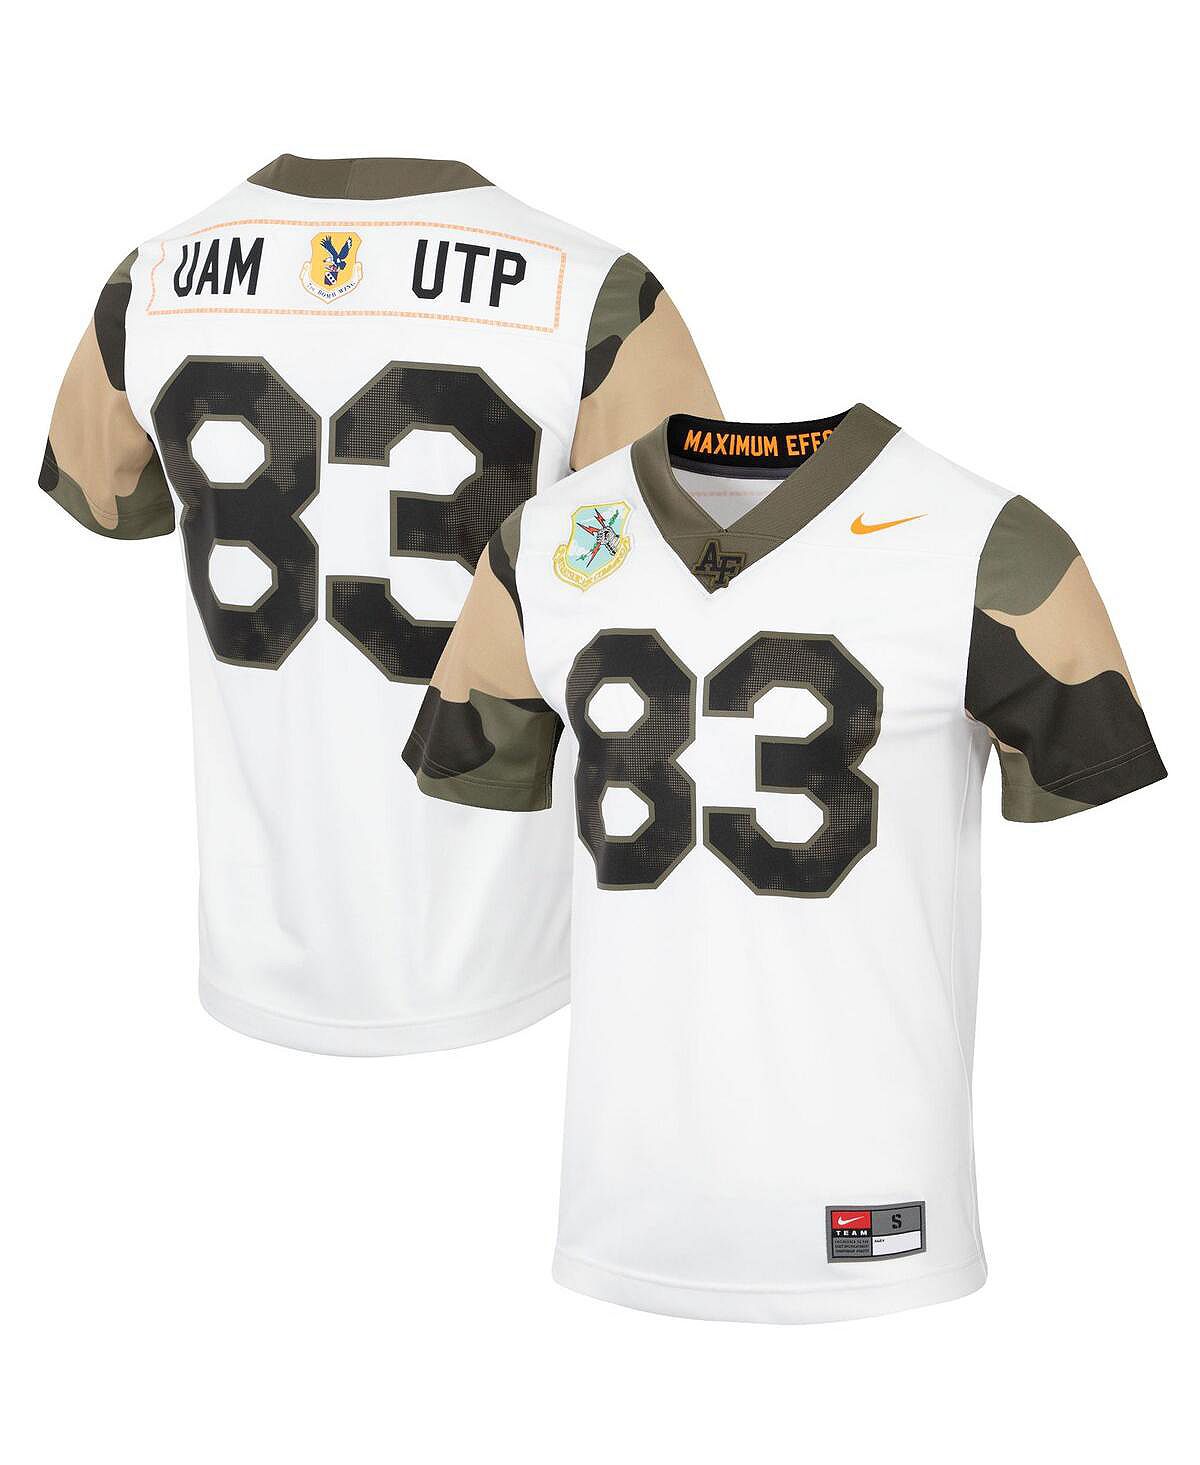 Футболка Nike Men's Number 83 White Air Force Falcons Special Game, белый